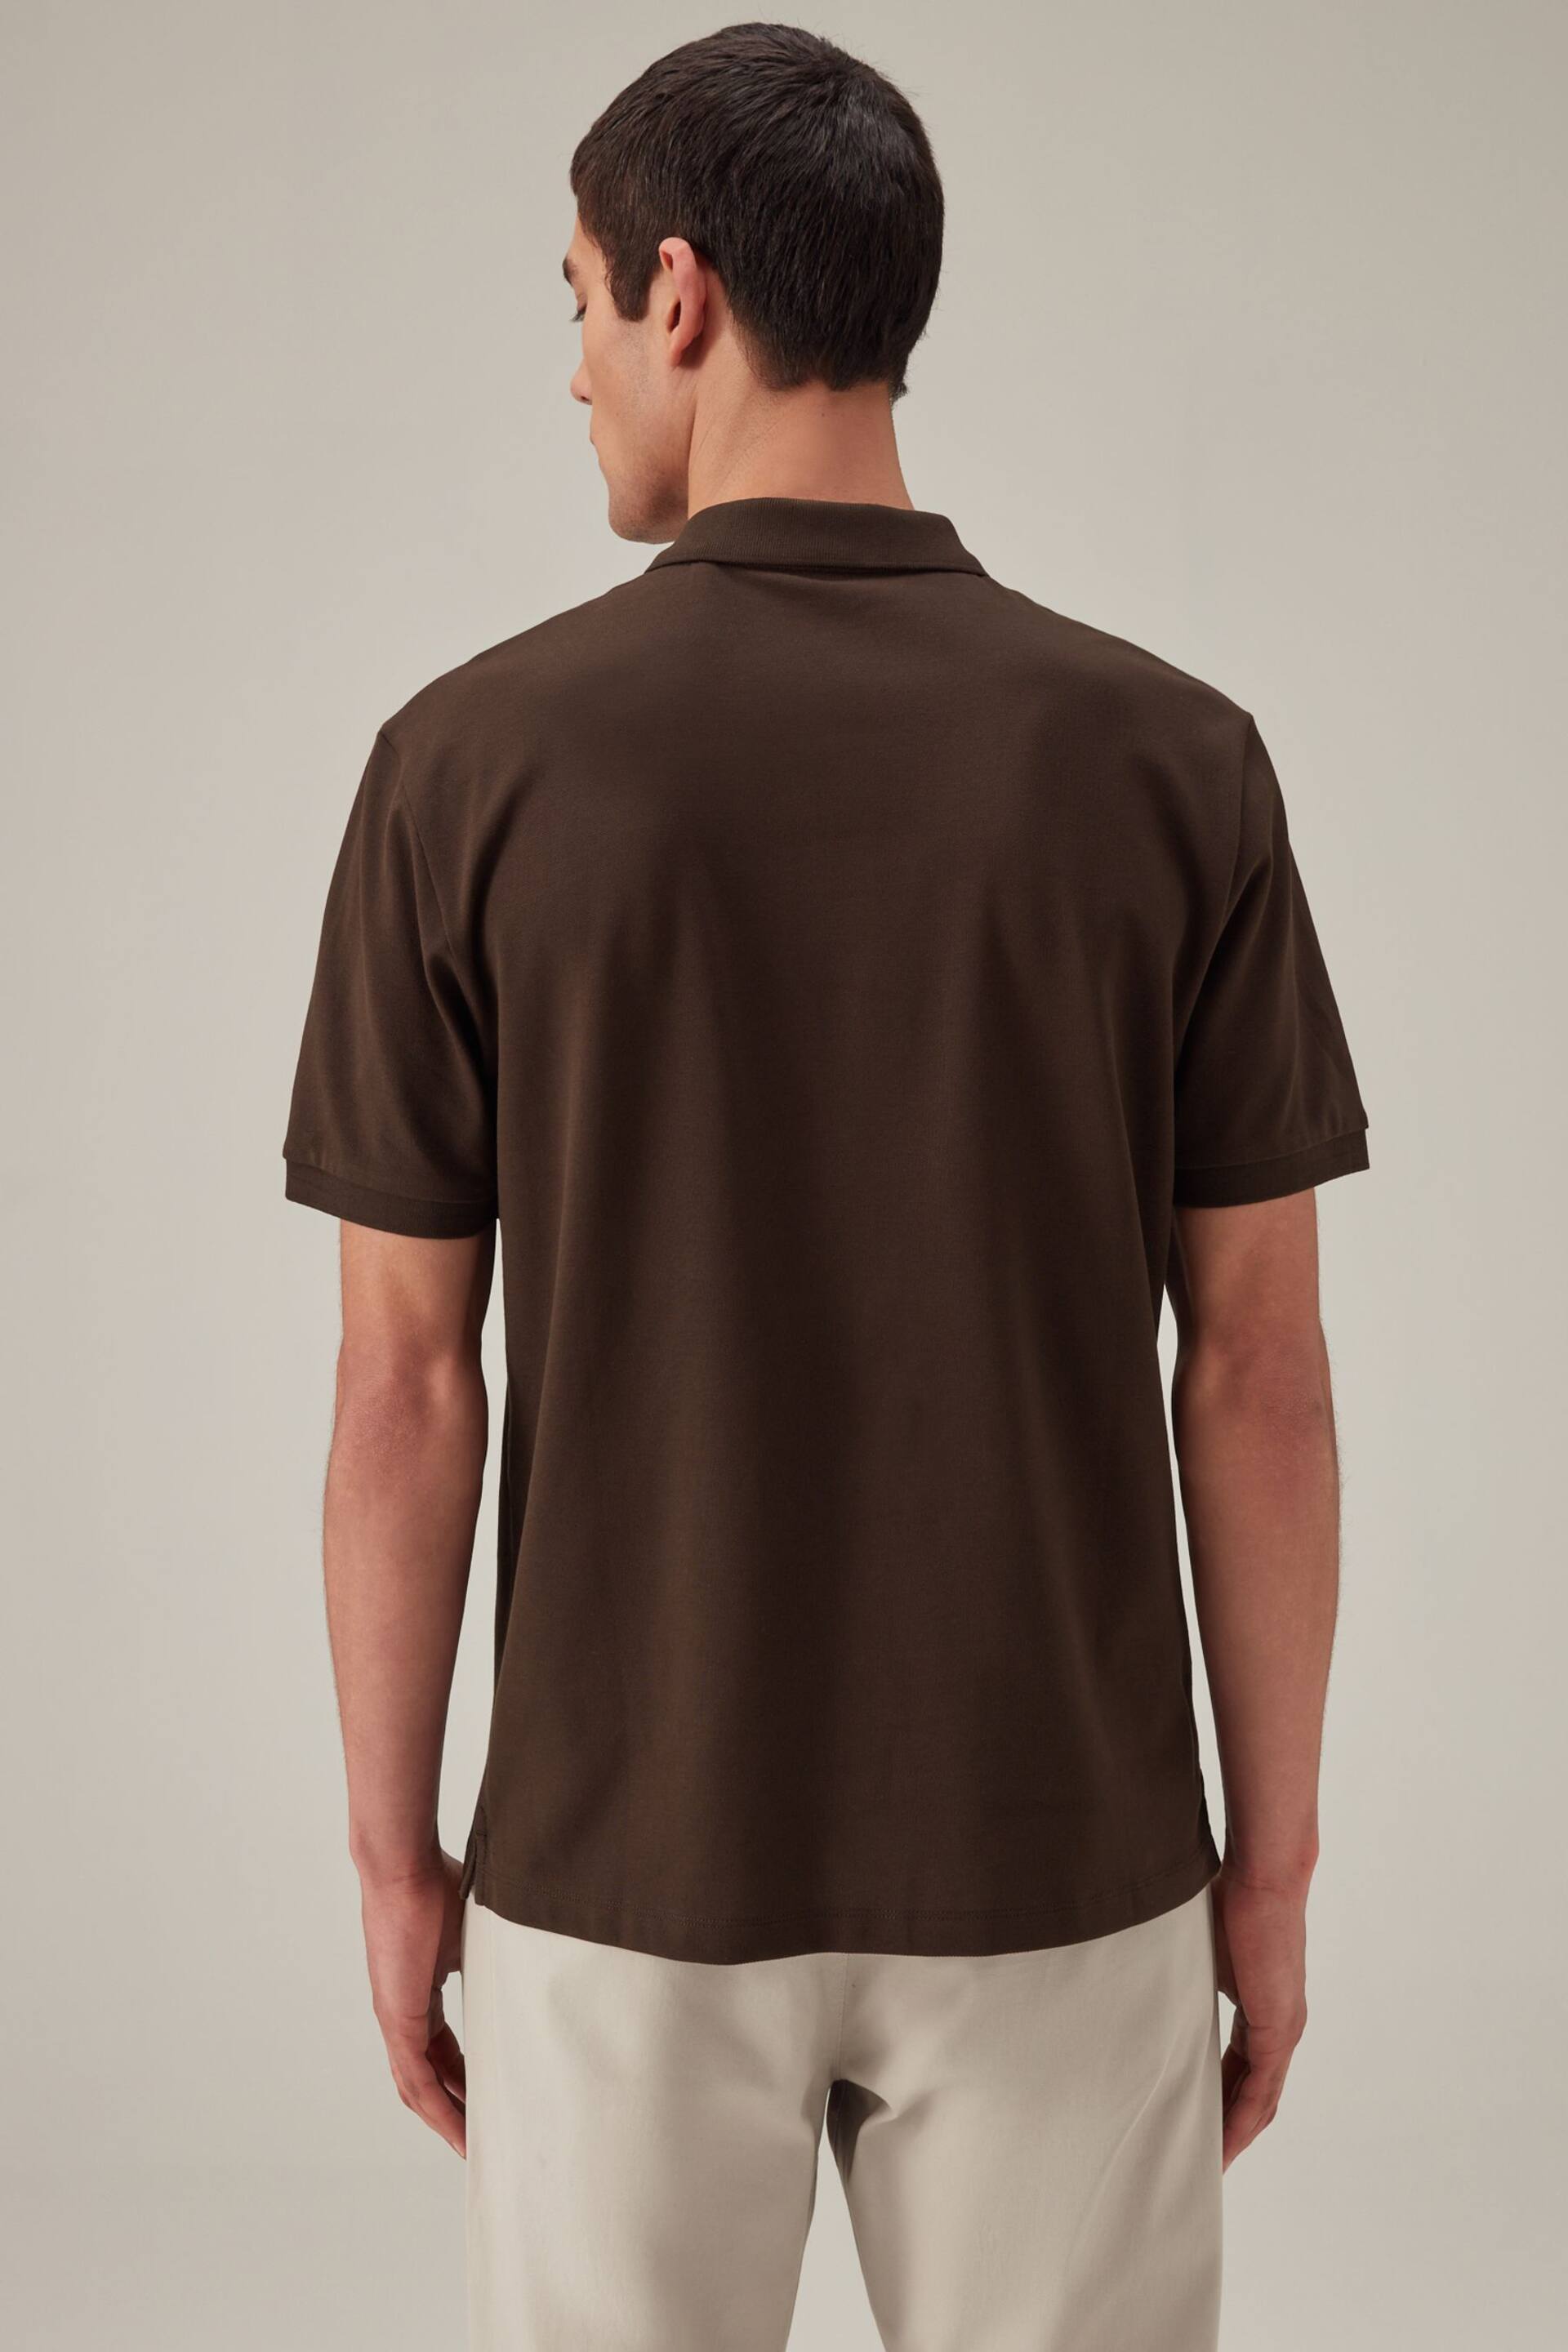 Brown Chocolate Regular Fit Short Sleeve Pique Polo Shirt - Image 3 of 8